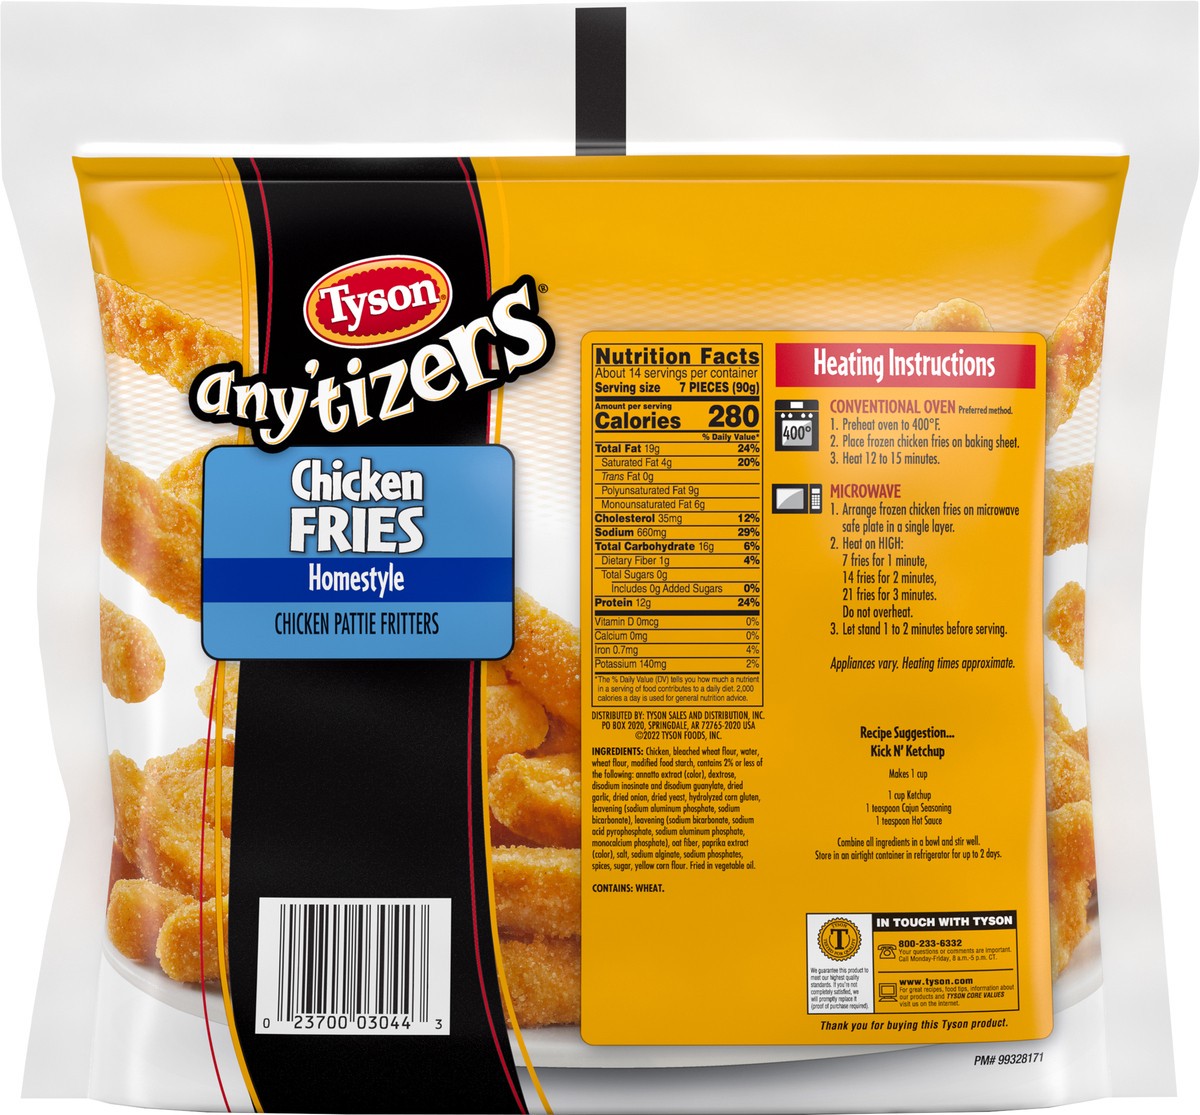 slide 5 of 6, TYSON ANYTIZERS Tyson Any'tizers Homestyle Chicken Fries, 44 oz. Family Pack (Frozen), 1.25 kg